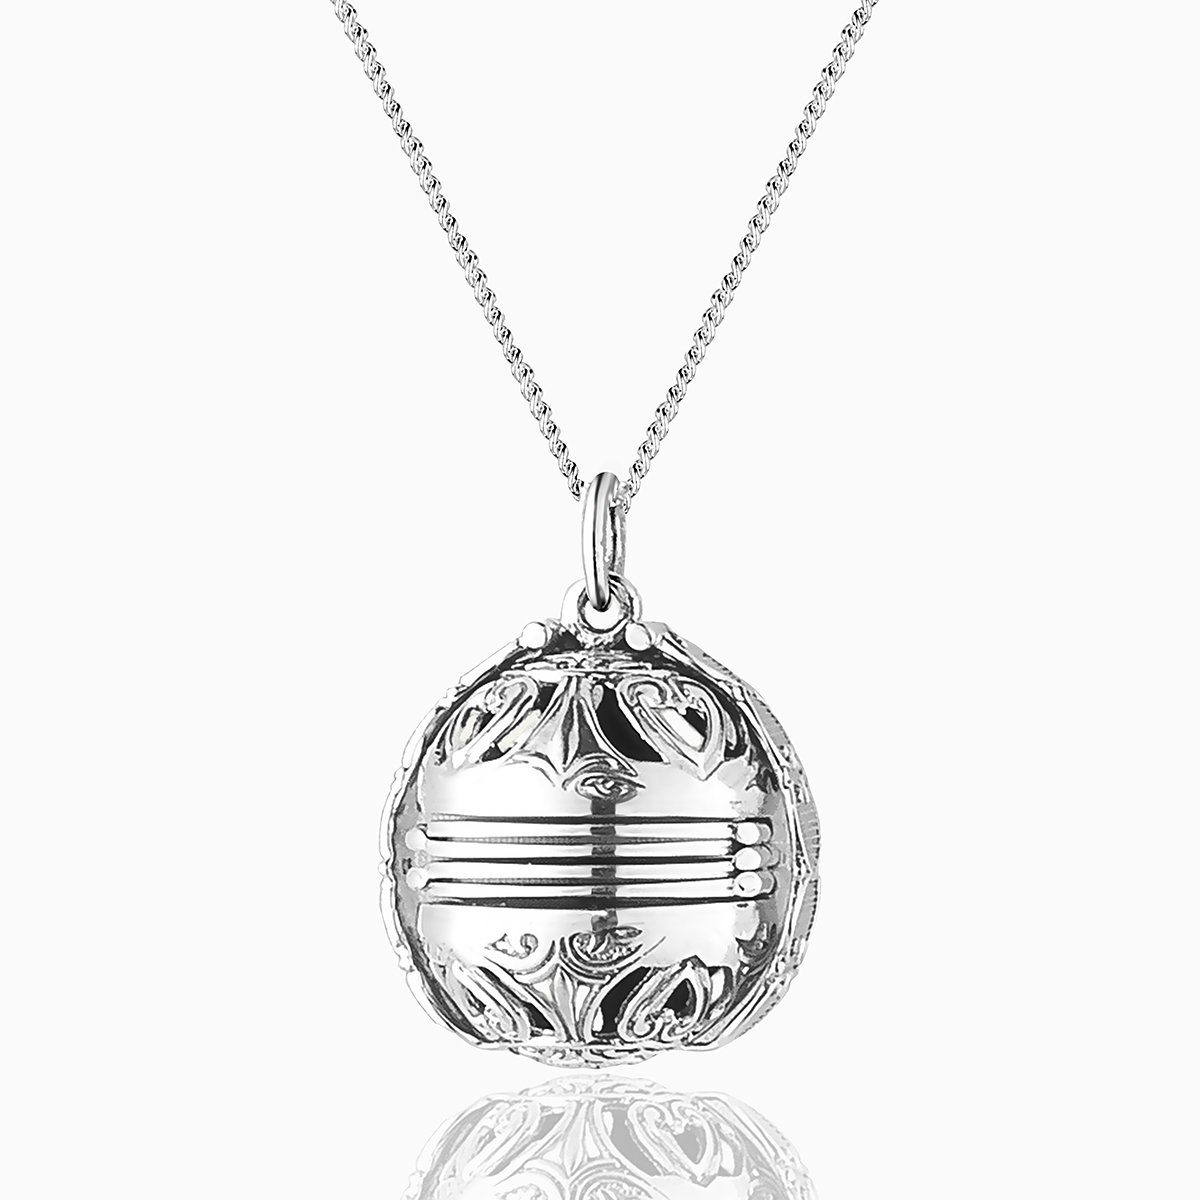 6-photo sterling silver filigree locket ball on a sterling silver curb chain